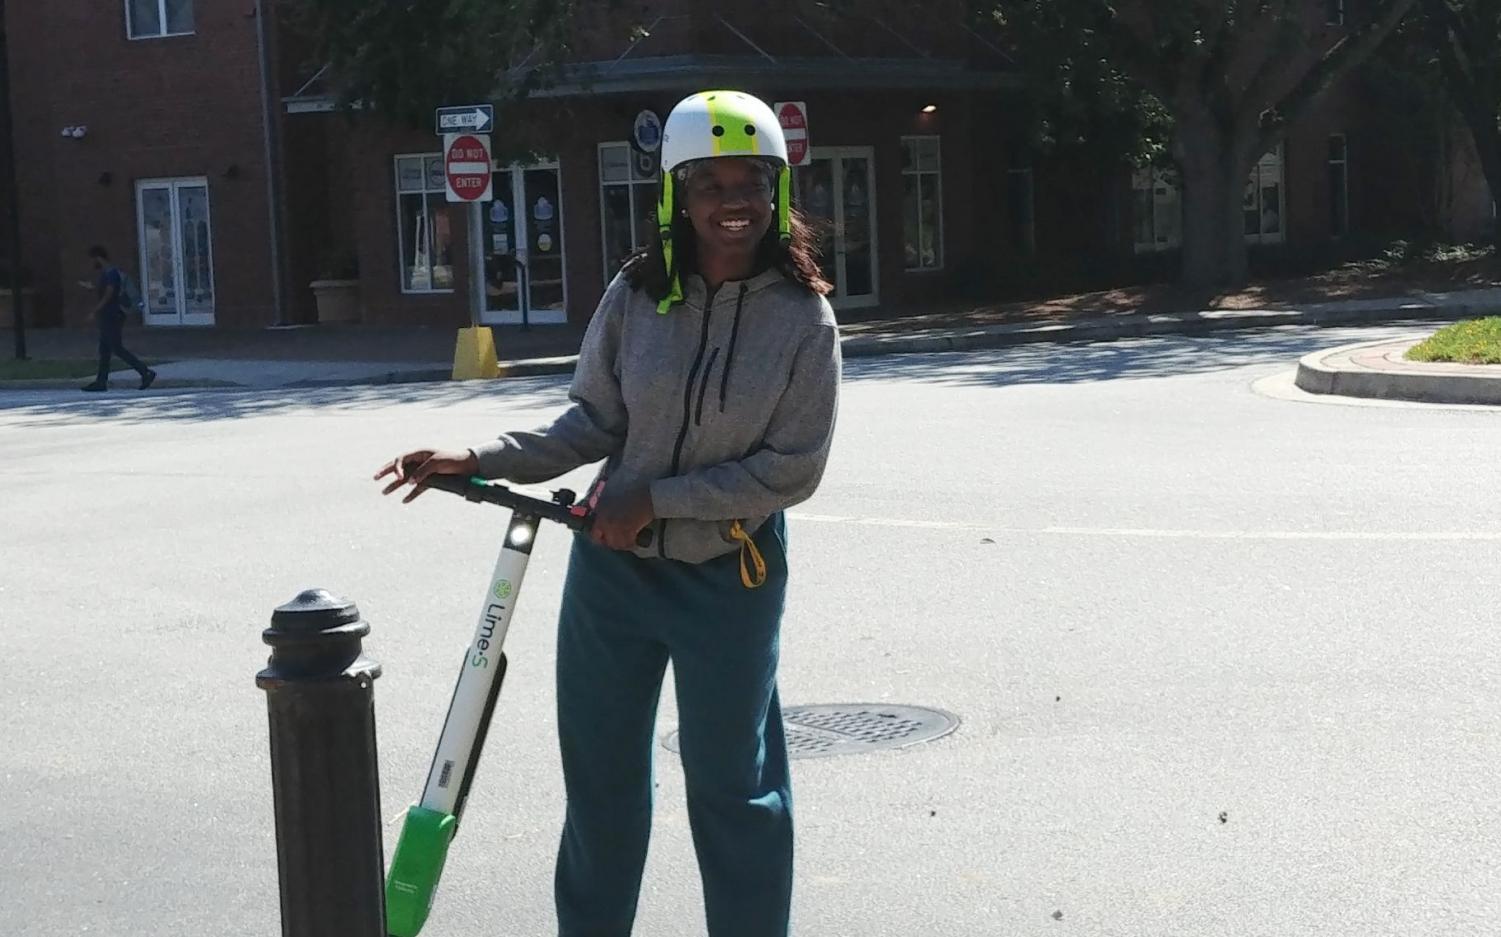 Lime+scooters+now+available+on+campus